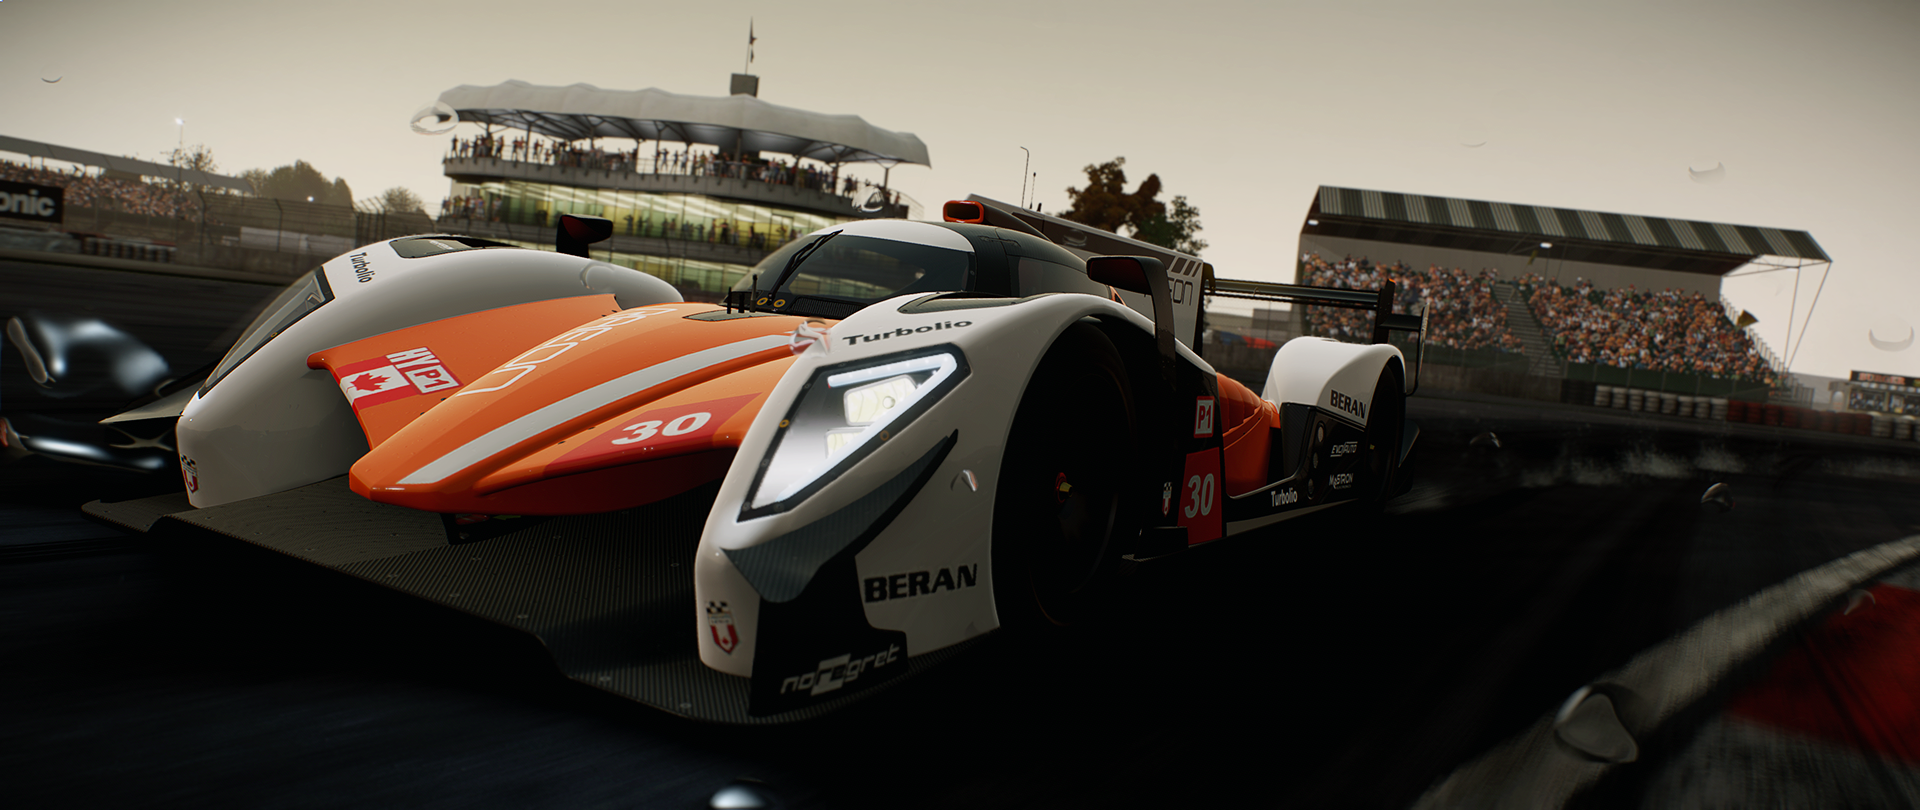 pcars_exe_dx11_20140712_034904_by_roderickartist-d7qeddy.png